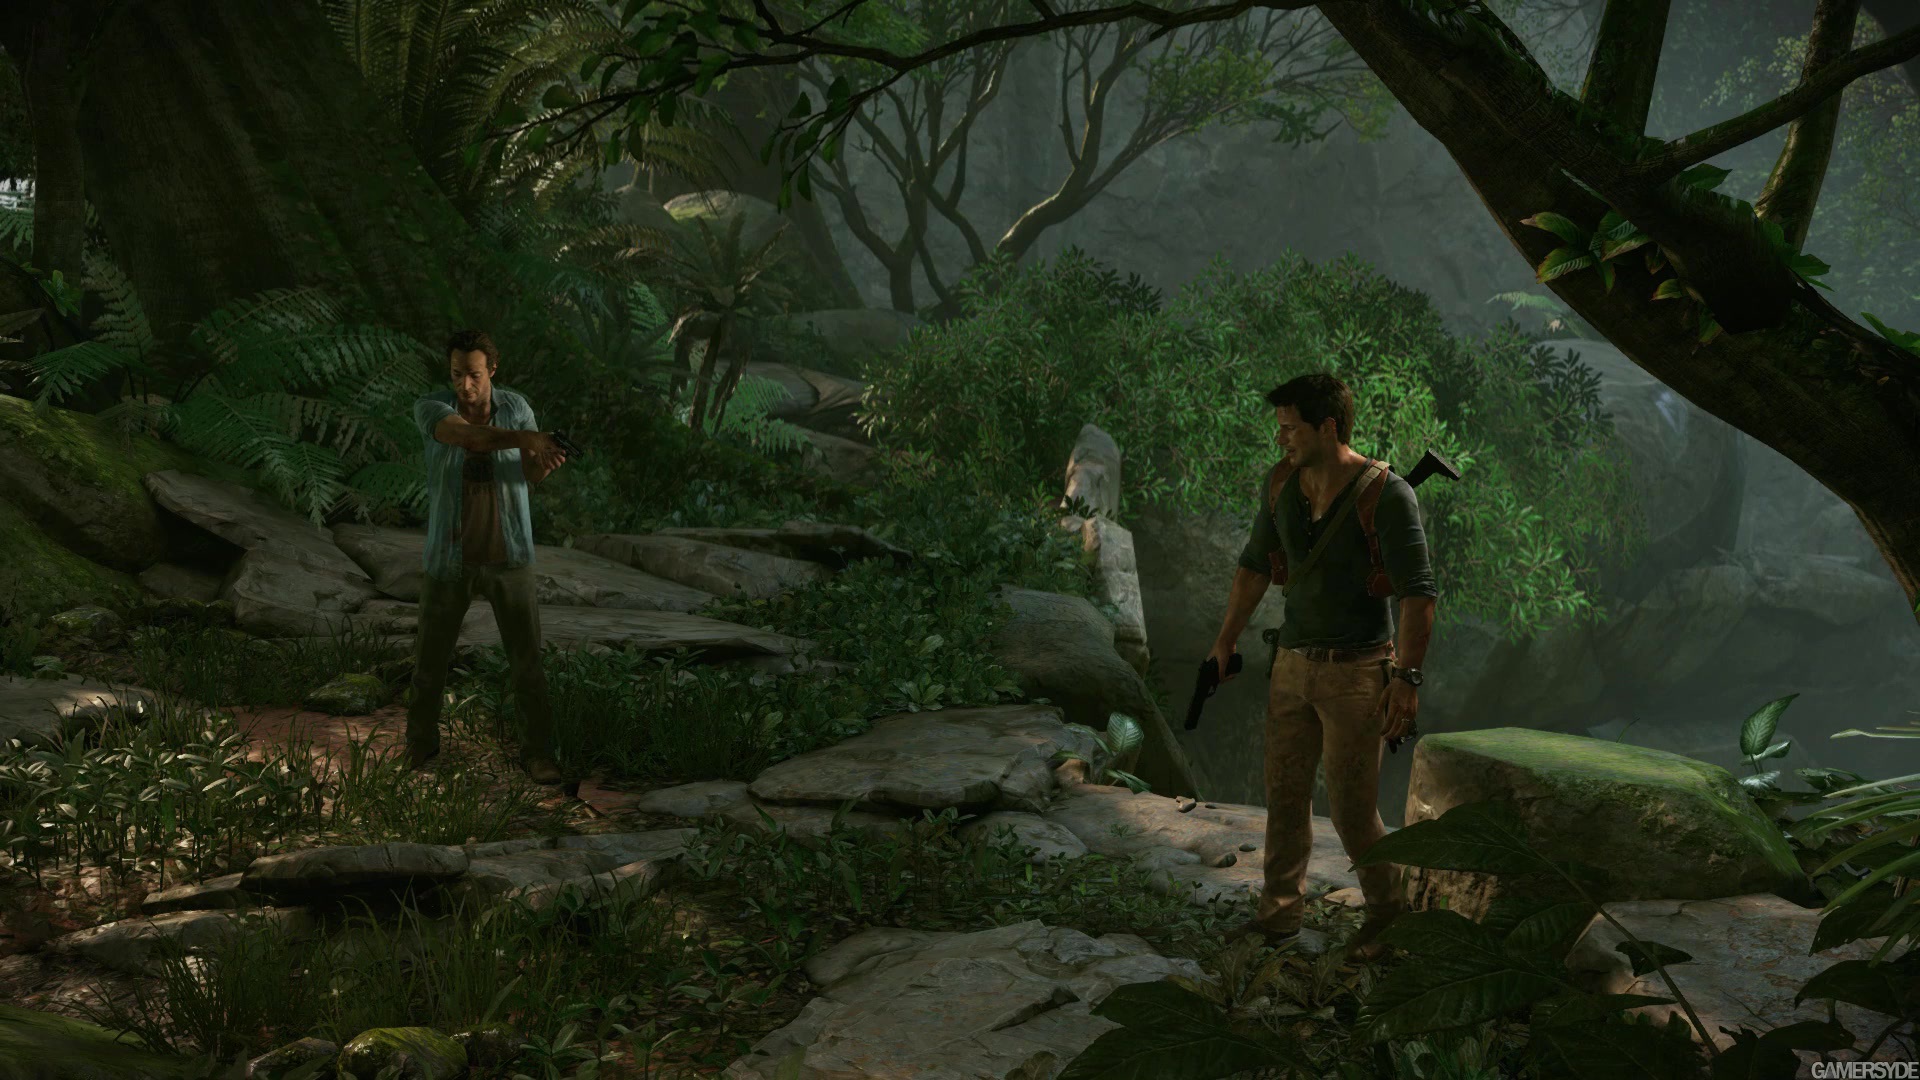 image_uncharted_4_a_thief_s_end-27145-2995_0031.jpg